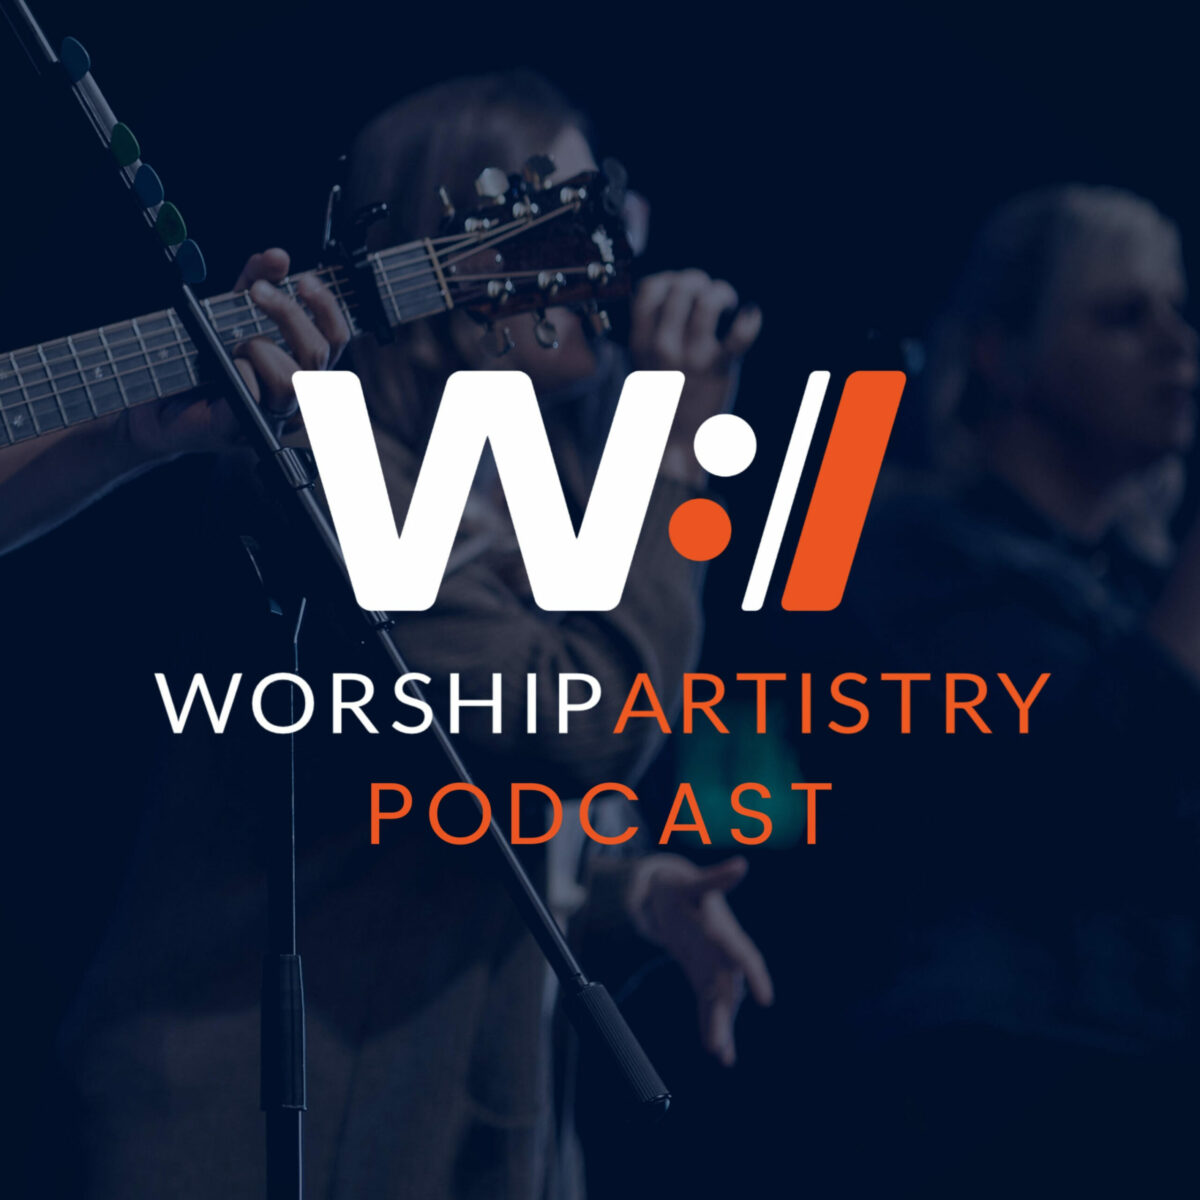 Worship Artistry Podcast Gear Edition: Pedalboards, Guitars, and Other Gear Talk with Jason and Nick